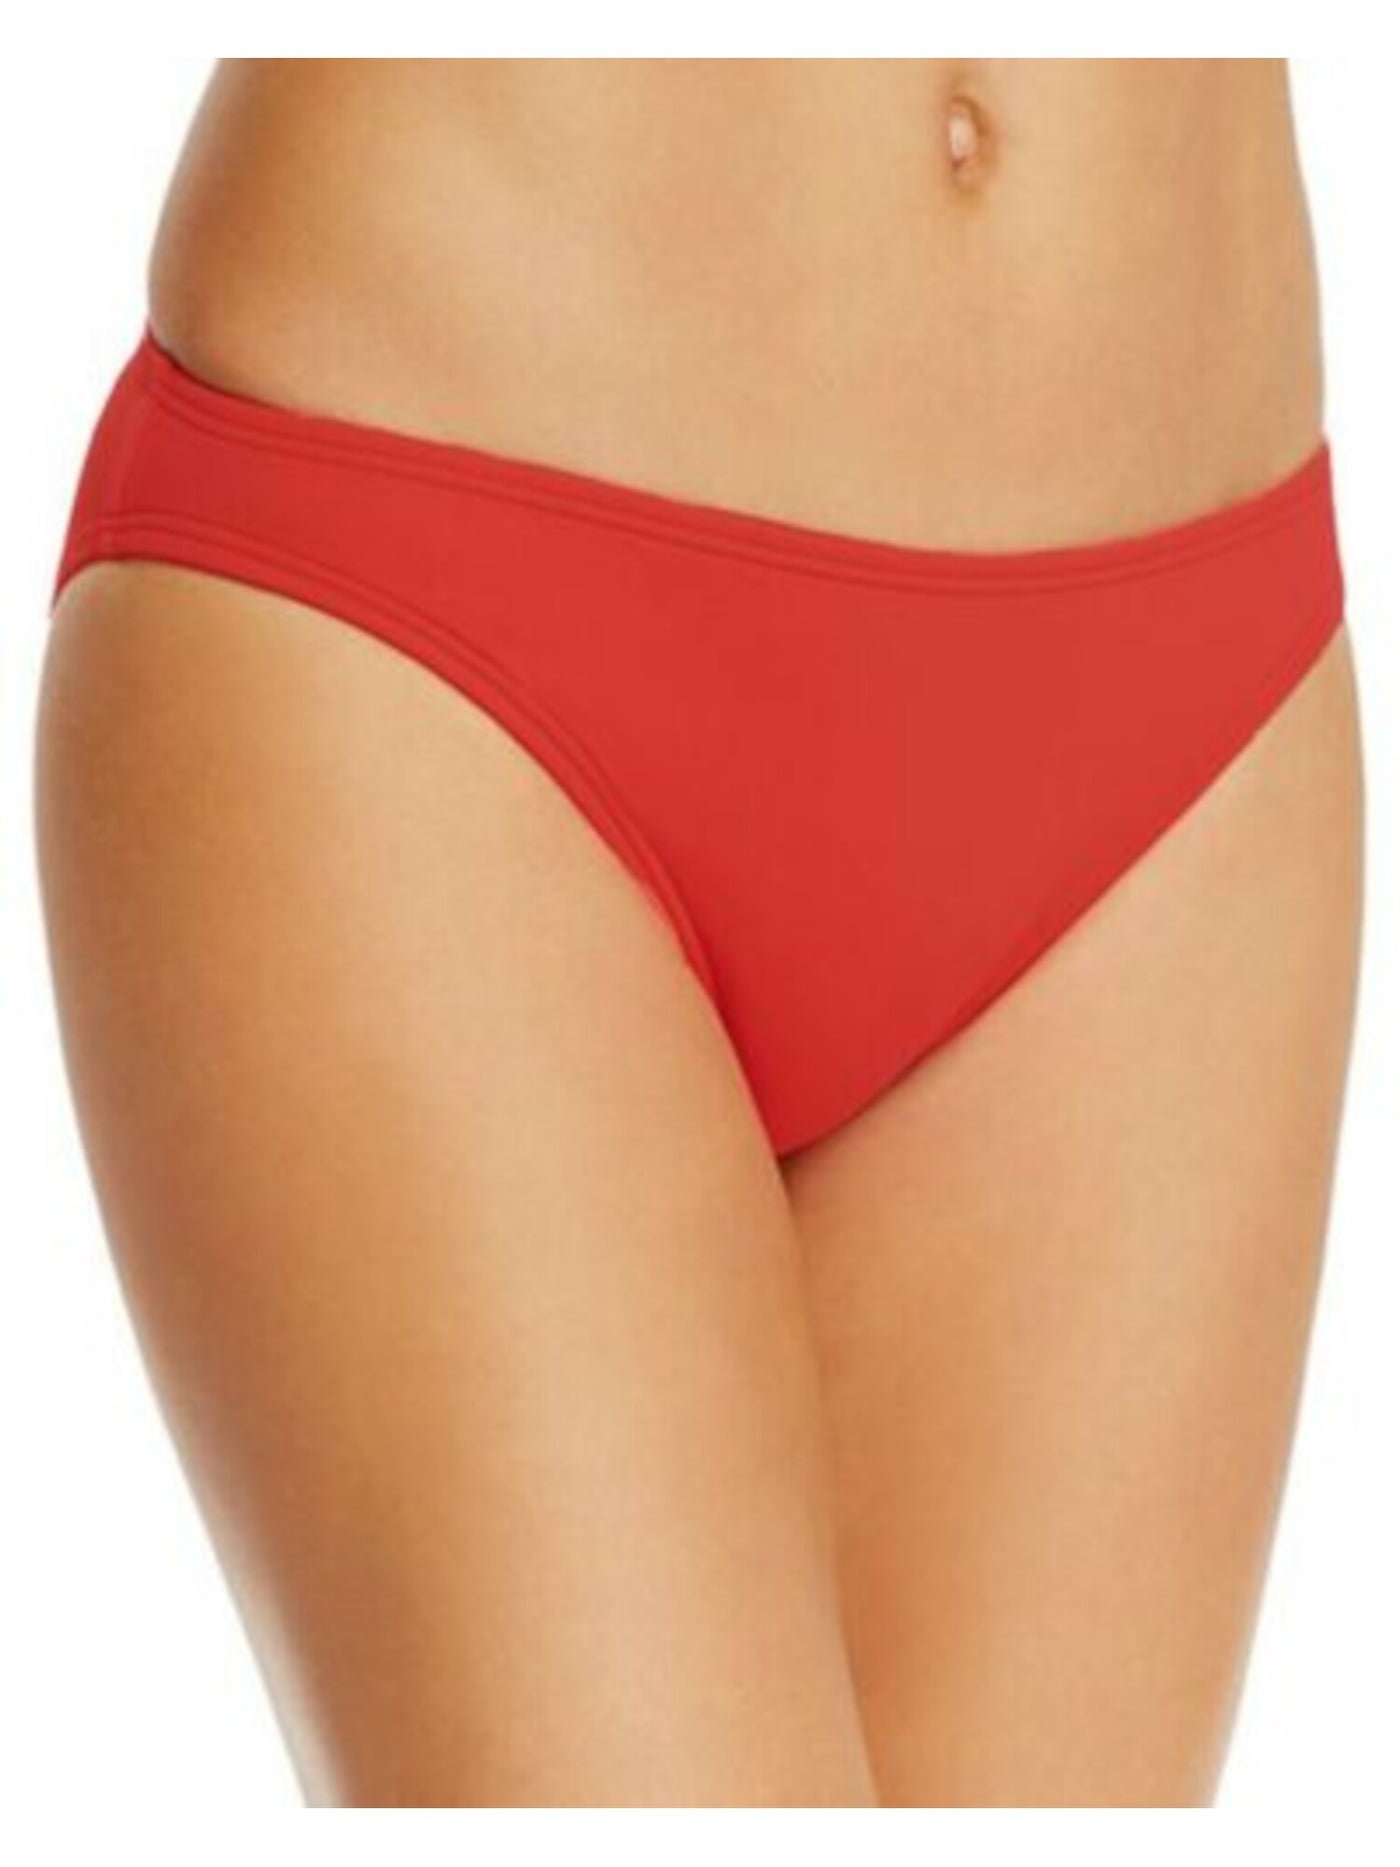 DKNY Women's Red Stretch Lined Bikini Full Coverage UV Protection Hipster Swimsuit Bottom M